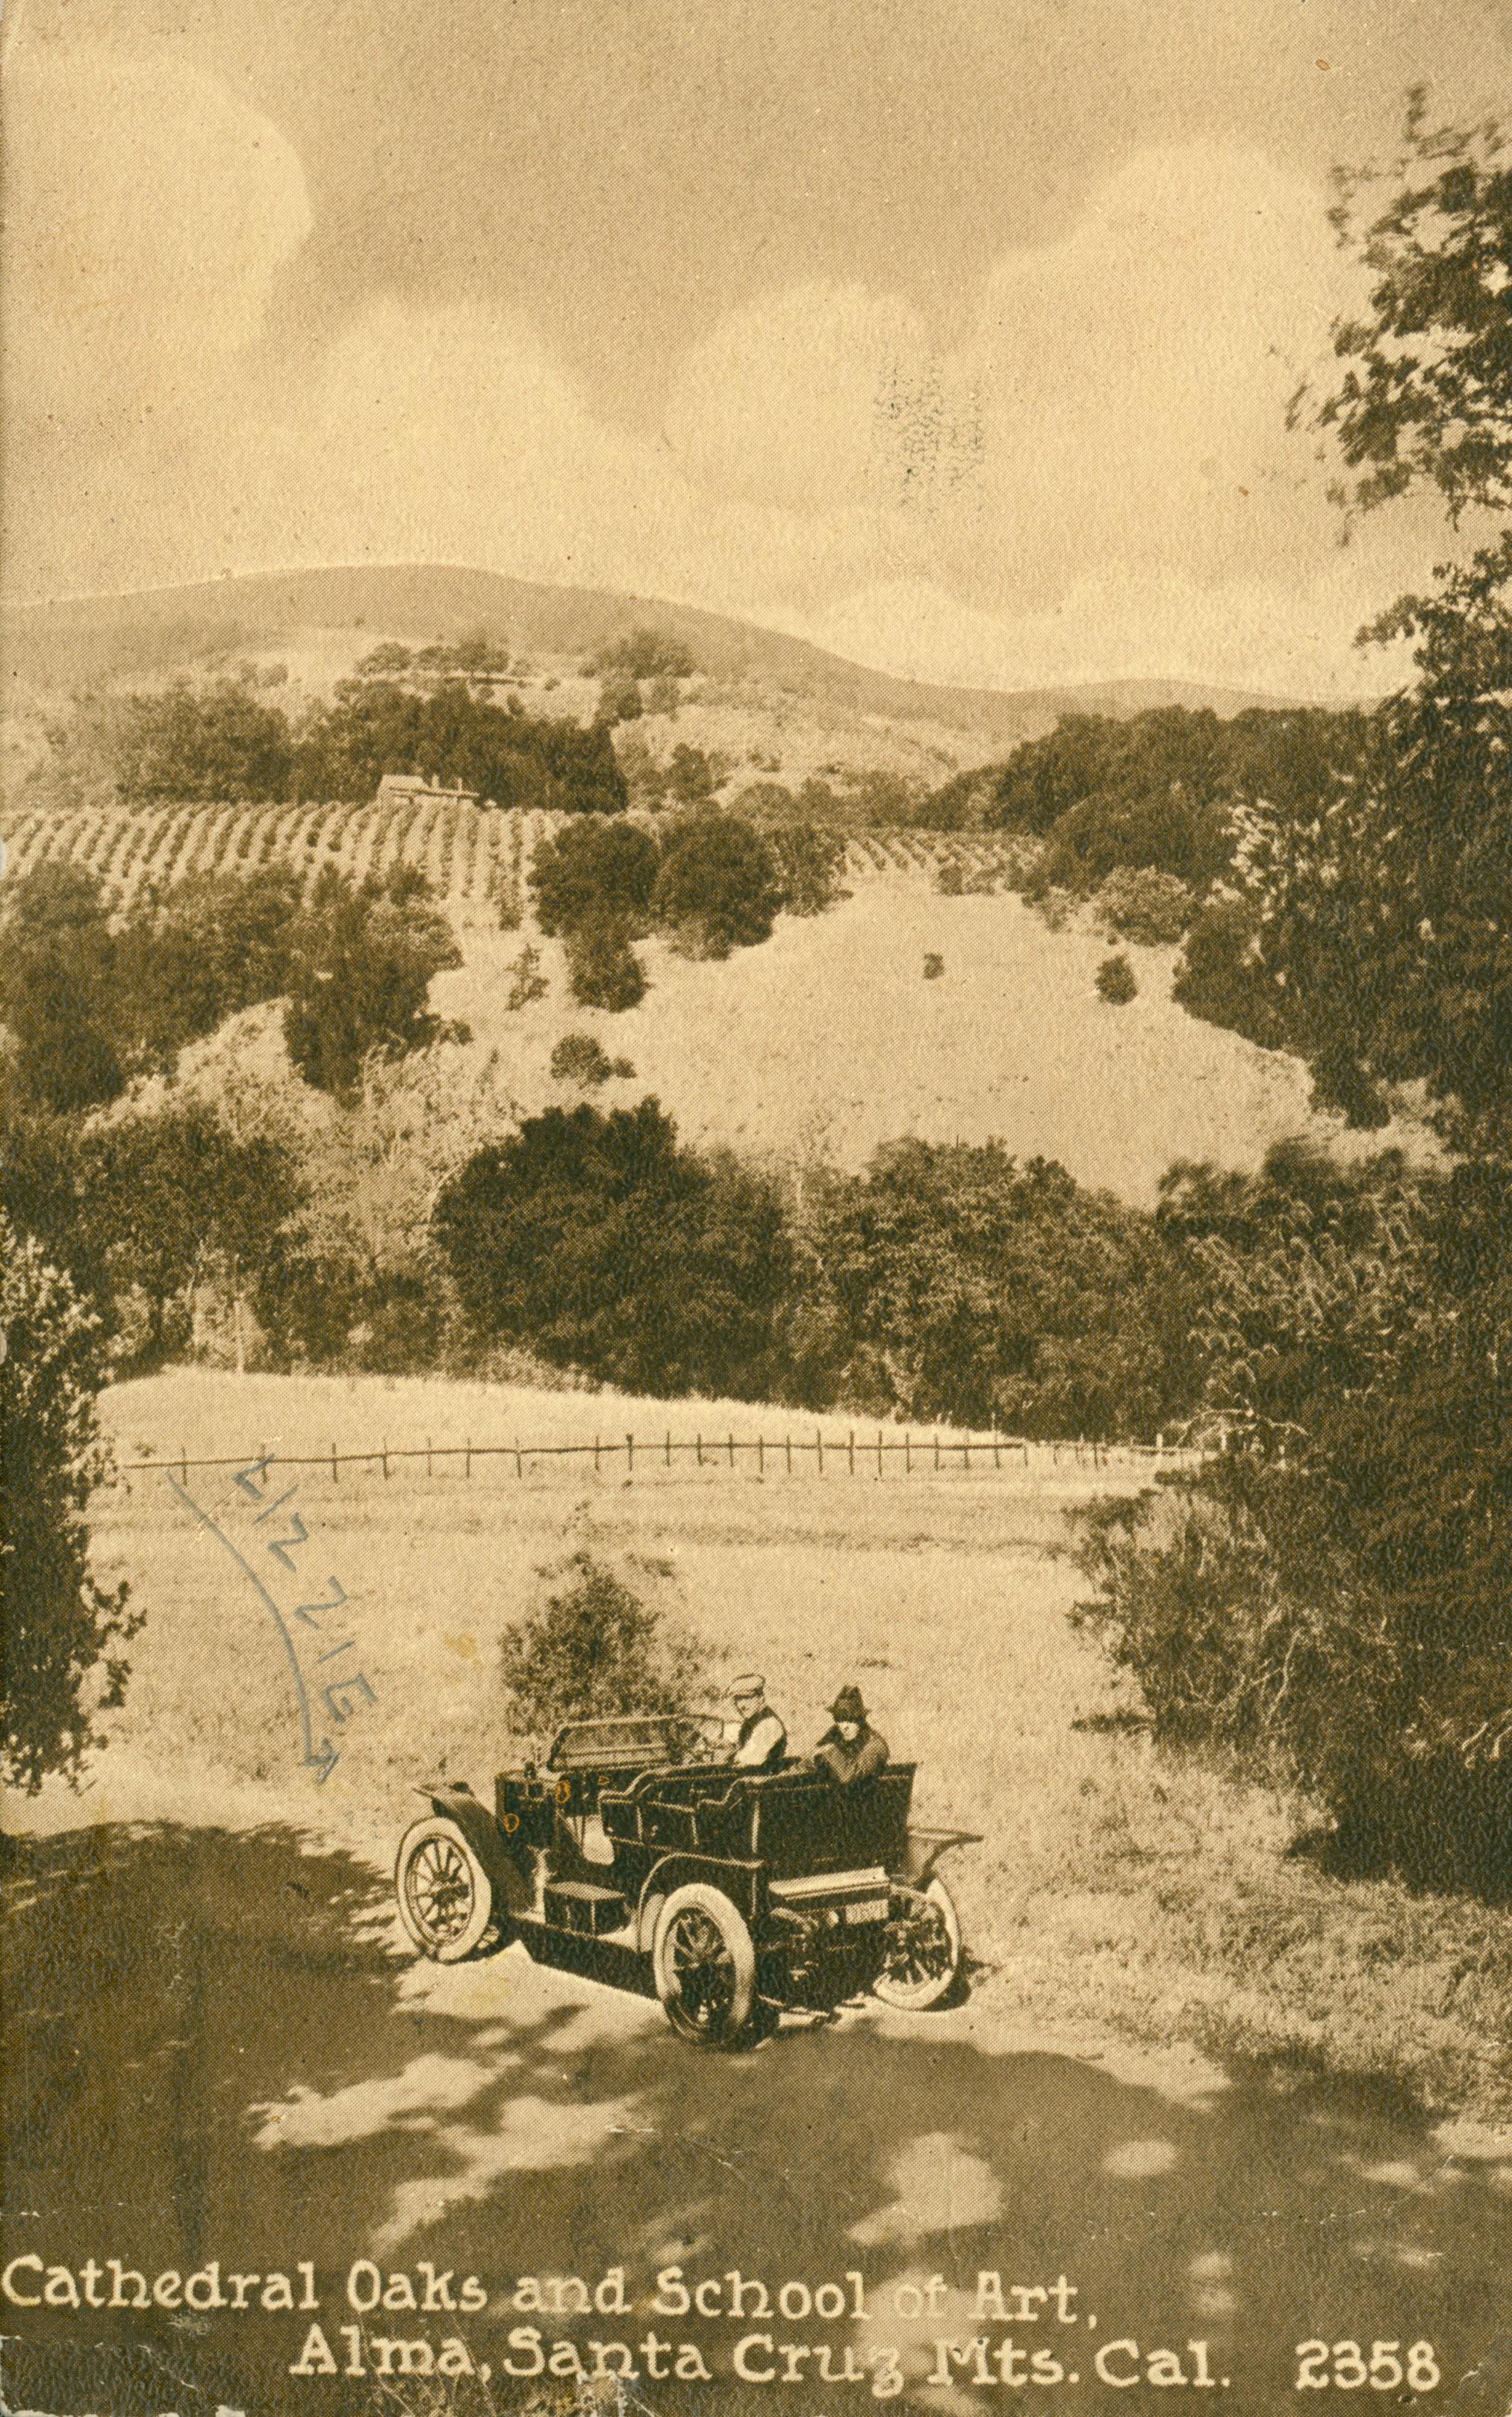 Shows an automobile in a clearing with trees and fields in the background